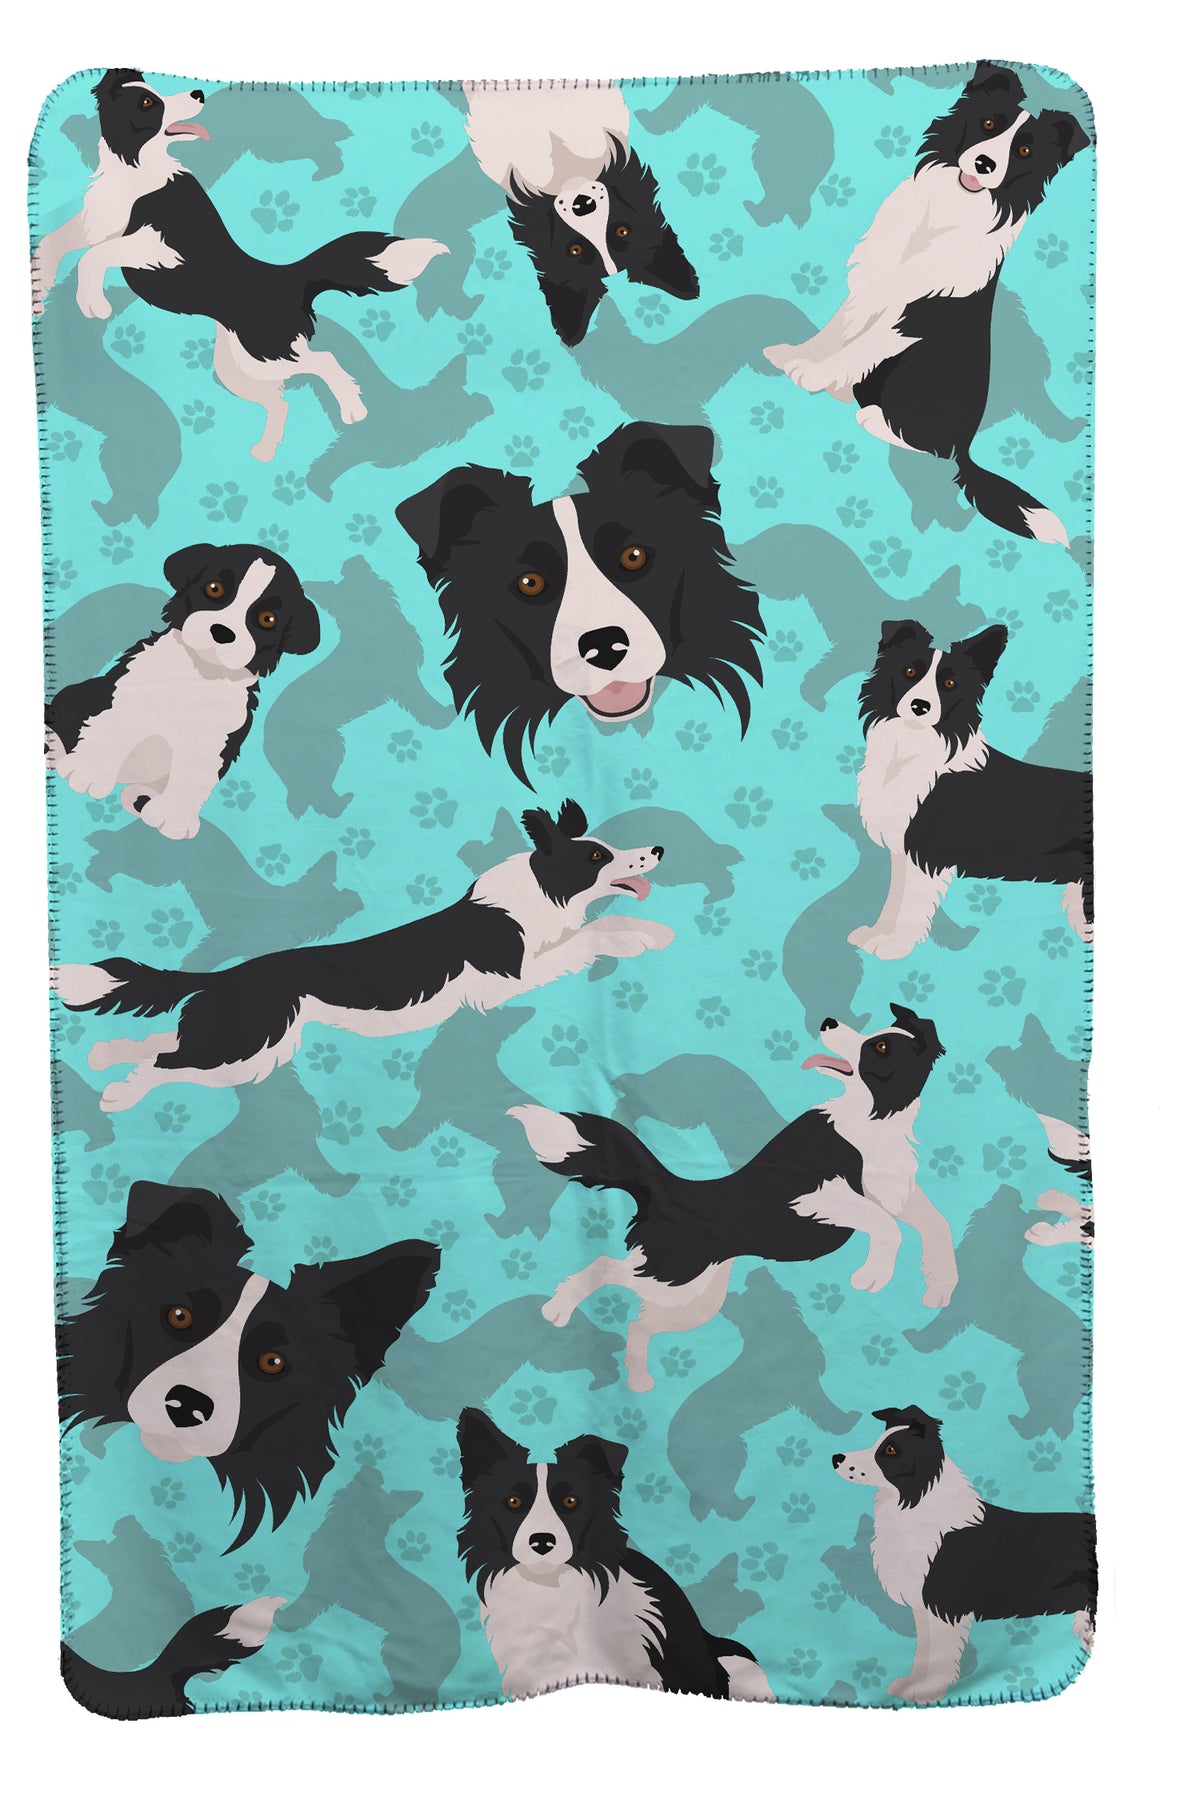 Buy this Border Collie Soft Travel Blanket with Bag